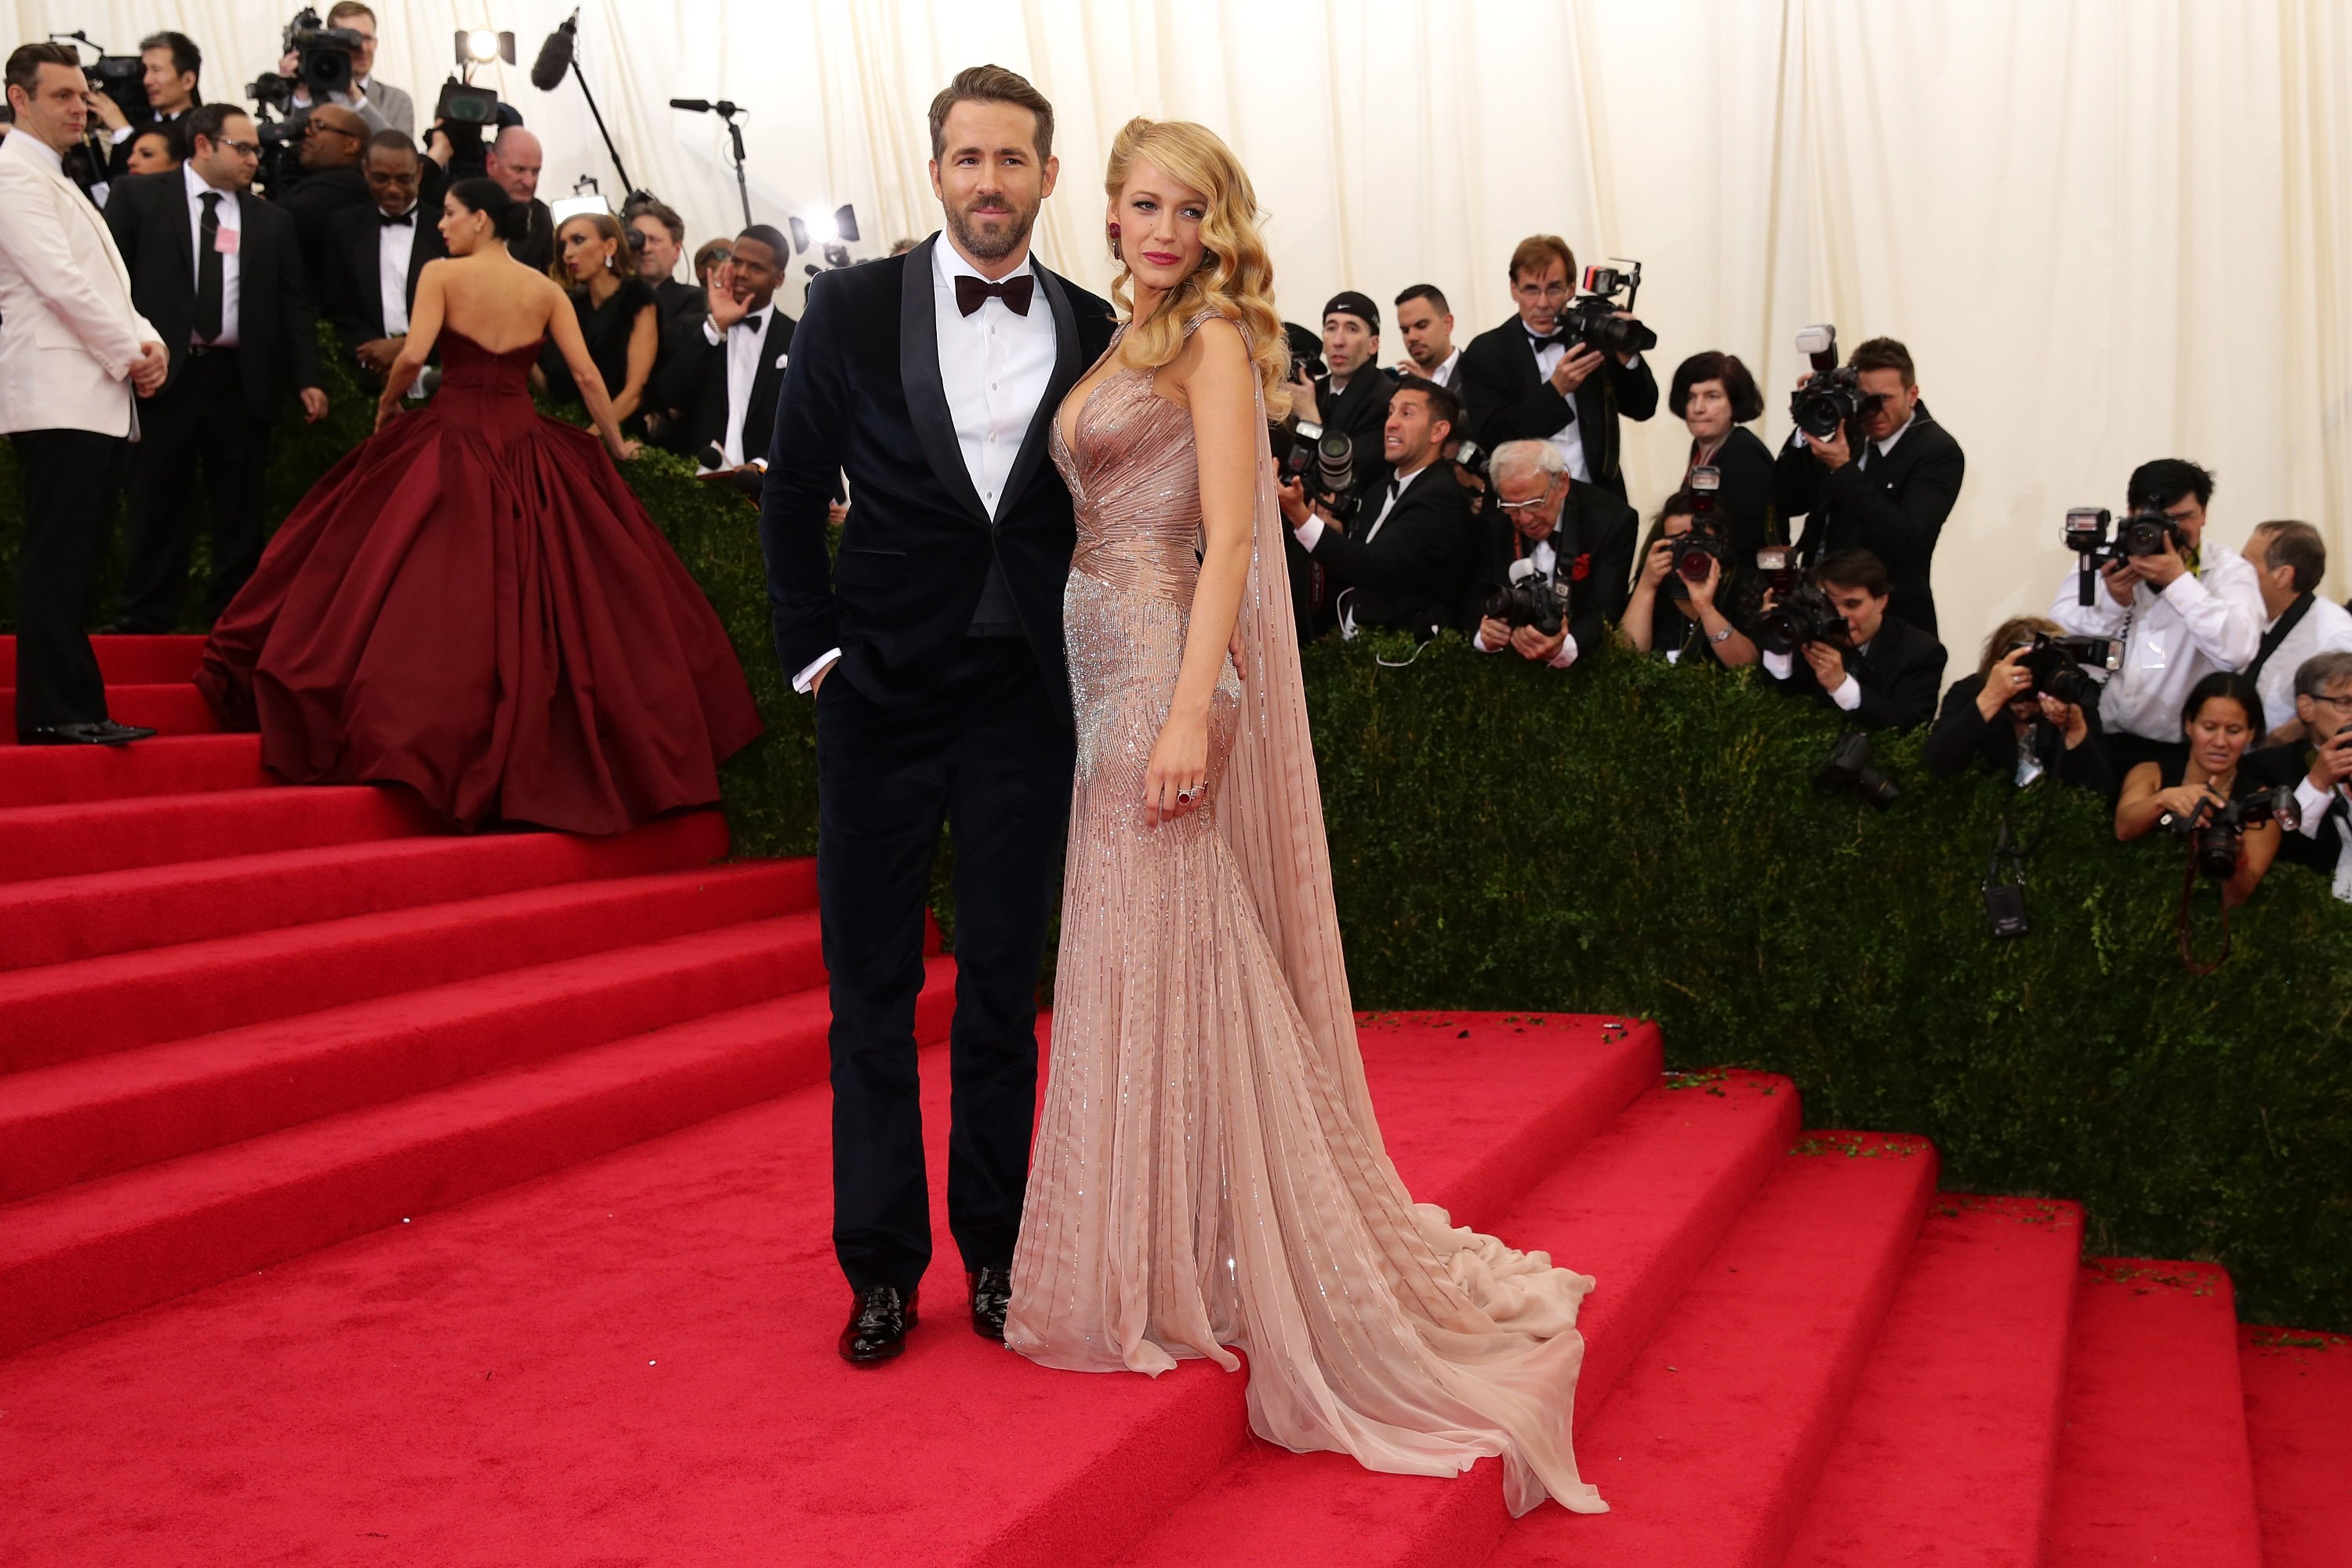 Blake Lively and Ryan Reynolds pose at the Met Gala in 2014